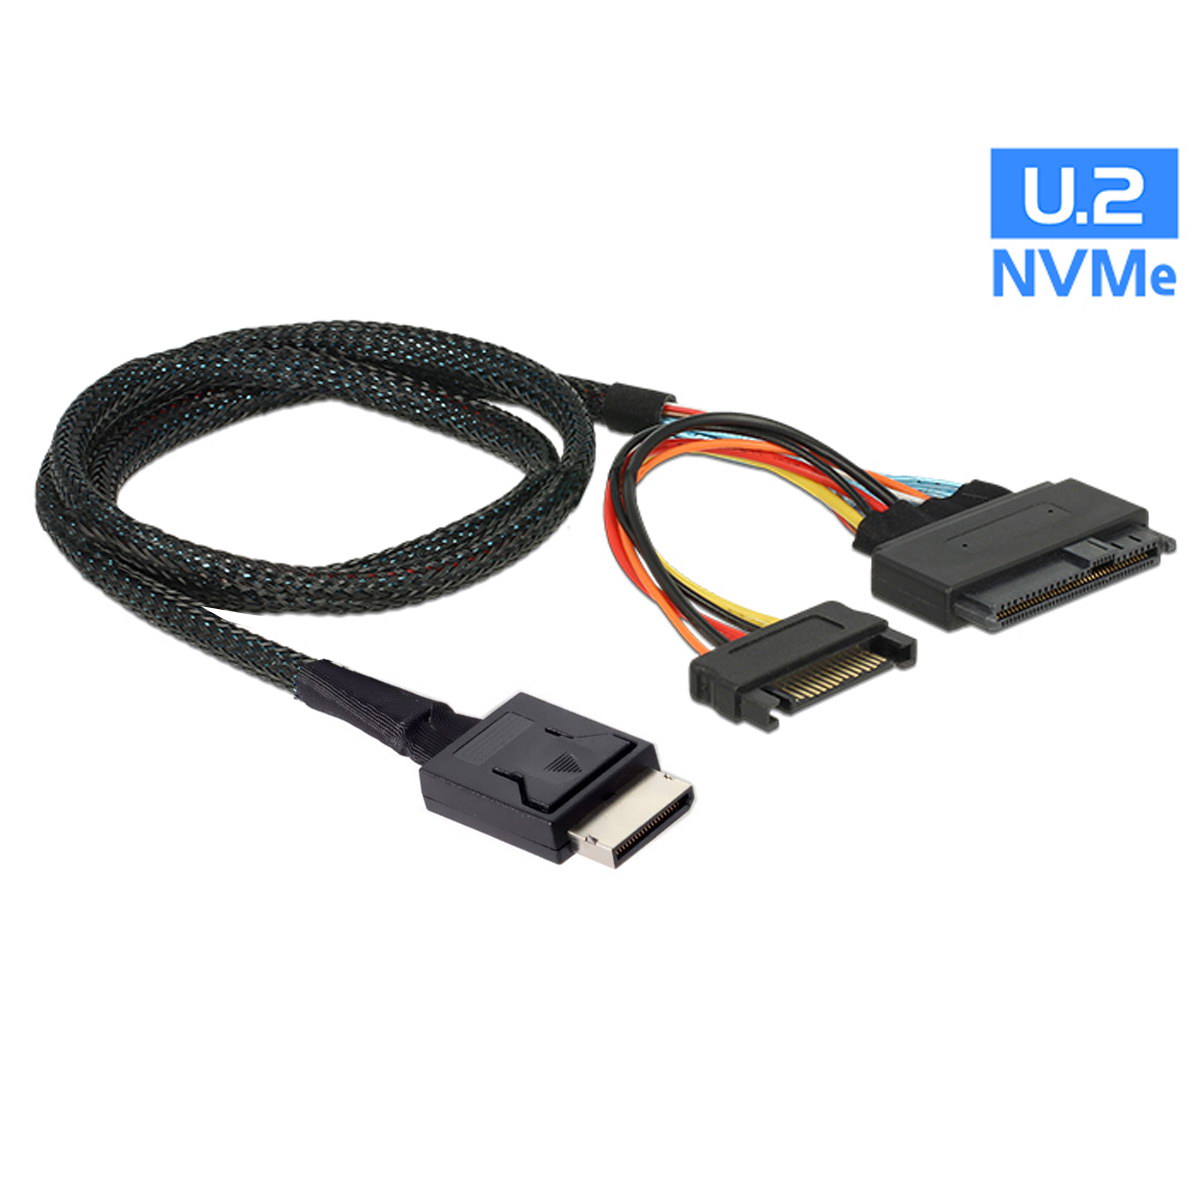 CableDeconn Oculink SFF-8611 to SFF-8639 U.2 U.3 NVME PCIe PCI-Express Cable 0.5m for SSD with 15Pin SATA Power Cable G0108